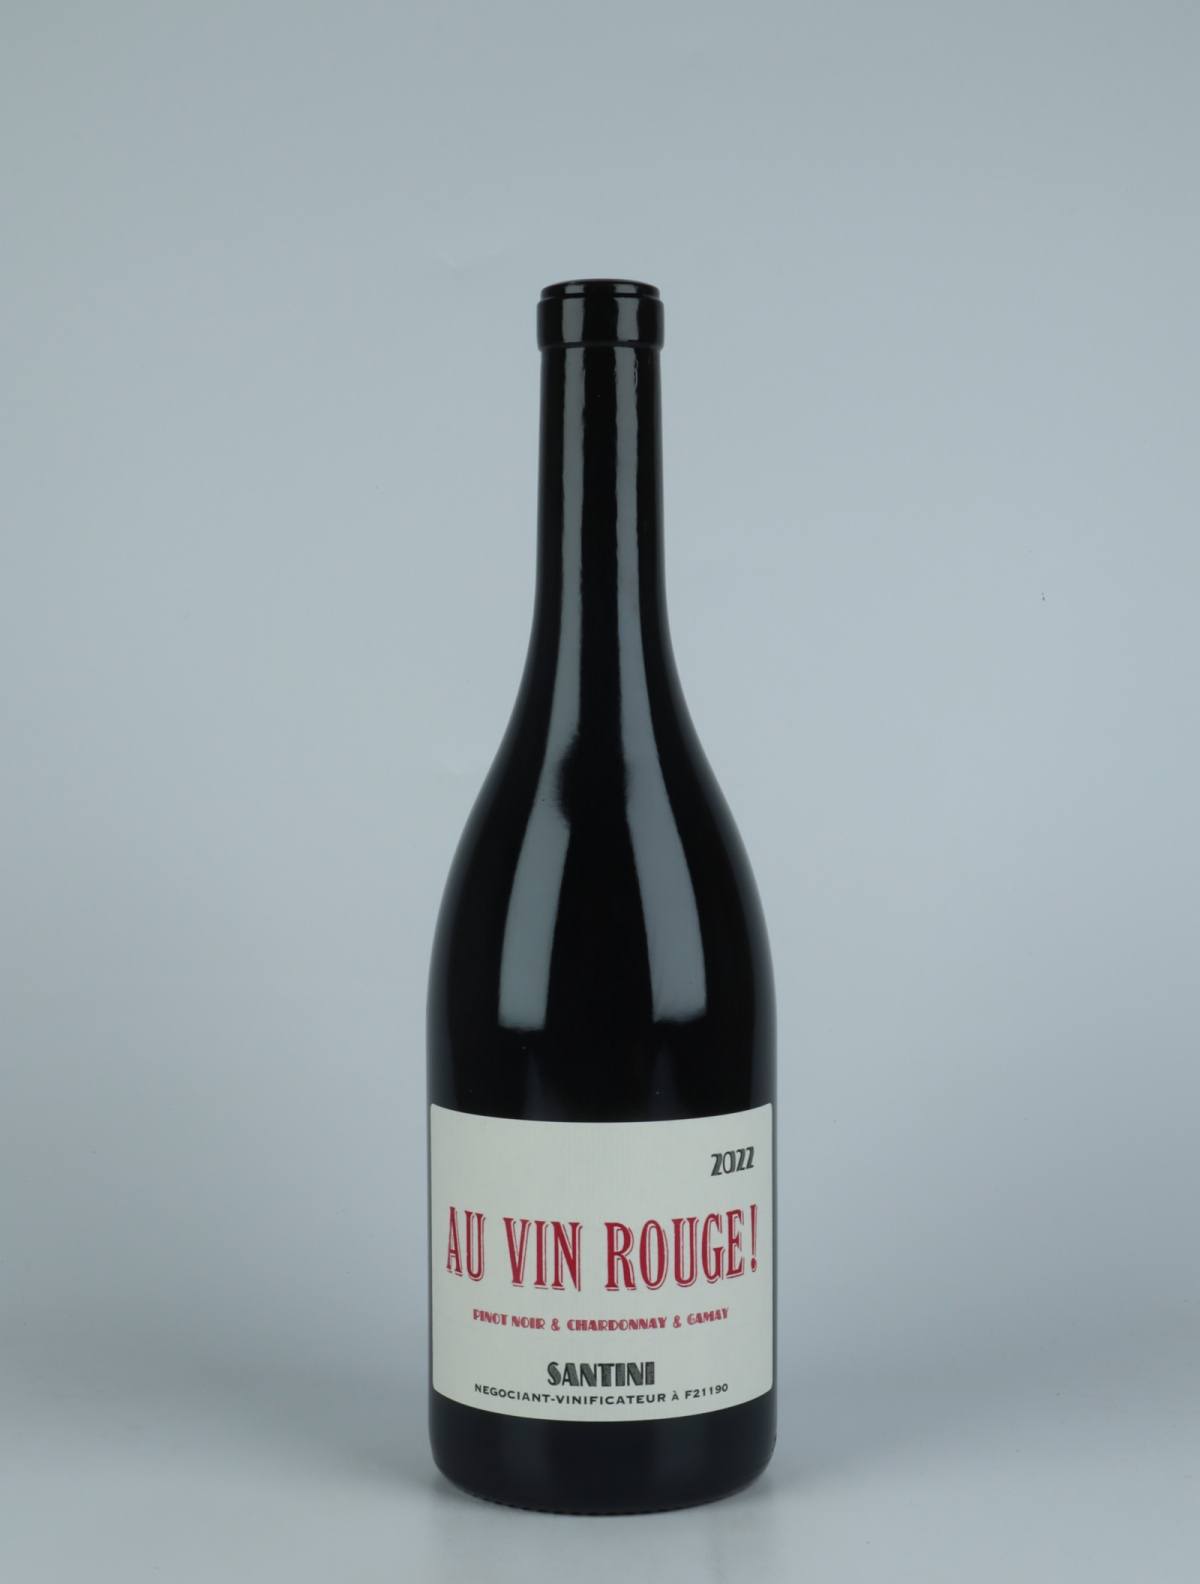 A bottle 2022 Au Vin Rouge! Red wine from Santini, Burgundy in France